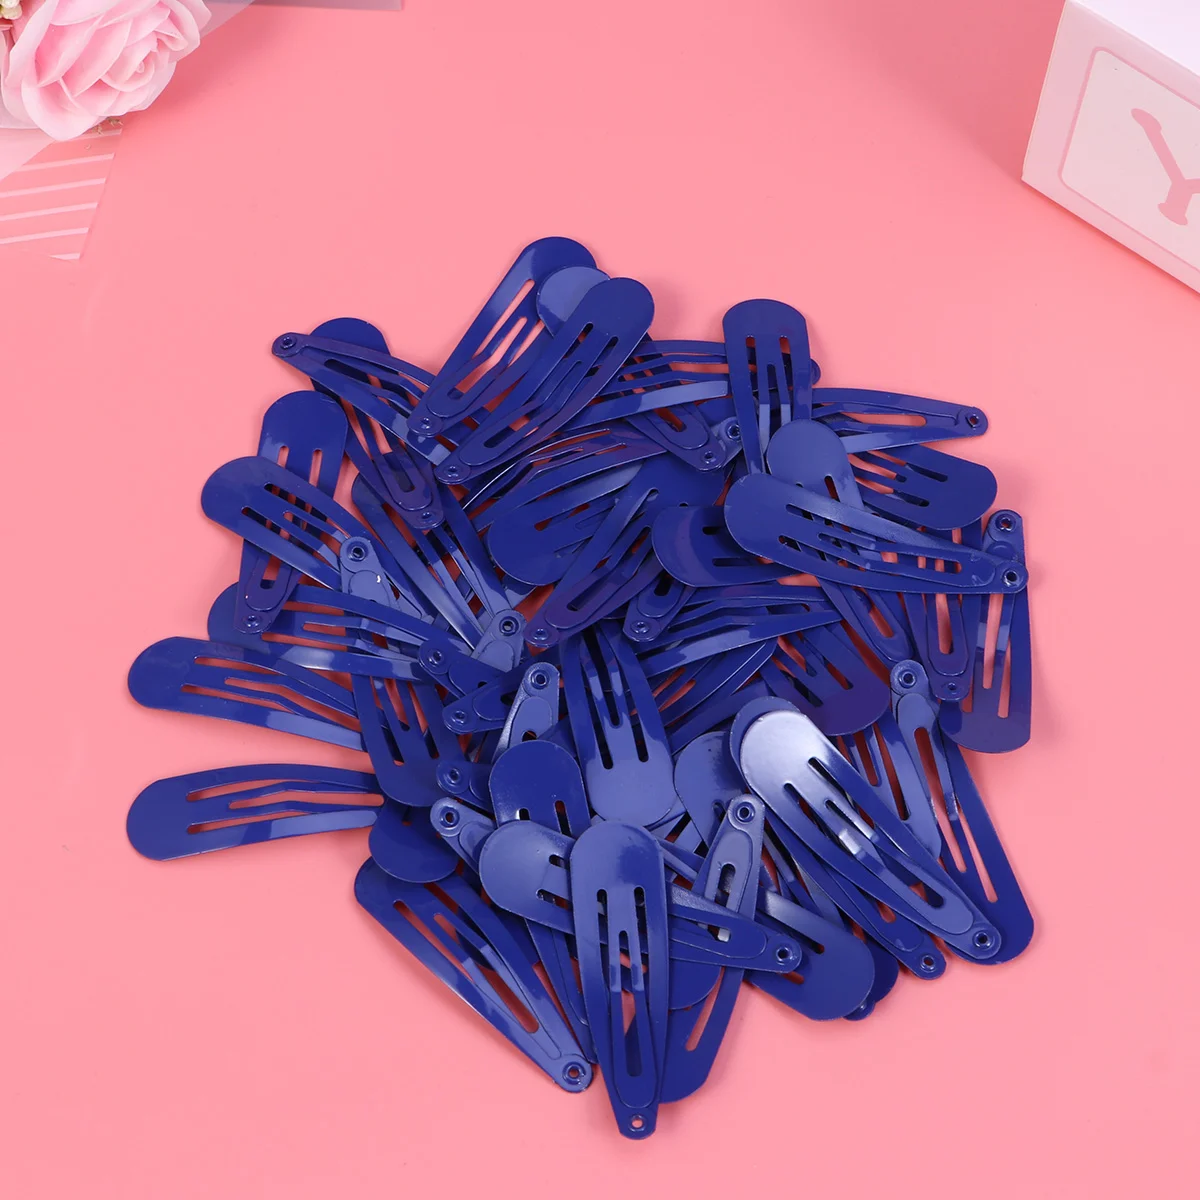 

50 Pcs Hair Clip Kids Barrette Clips Accessories Bobby Pin Miss Simple Metal Hairpin